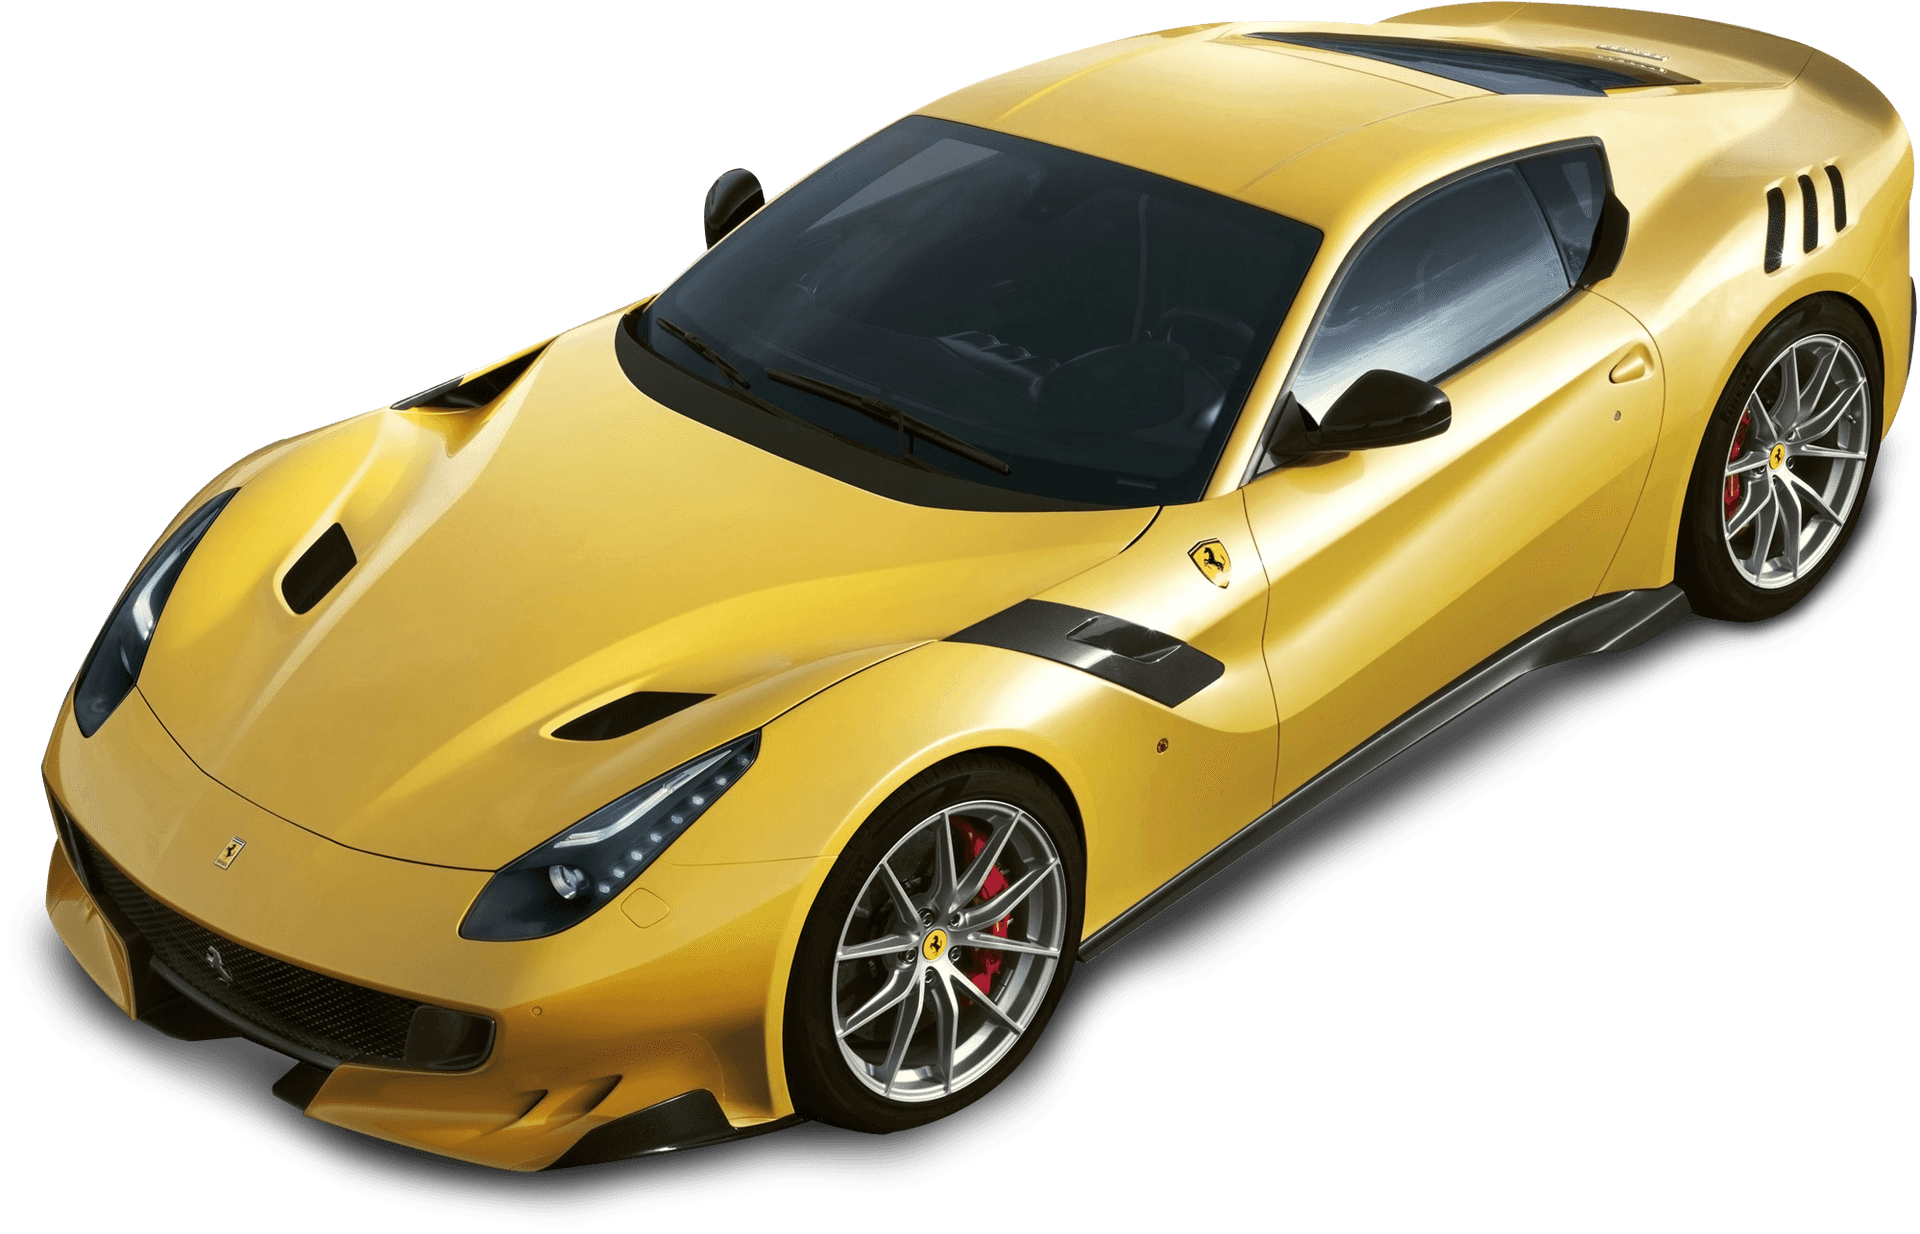 Yellow Ferrari Sports Car Isolated PNG image